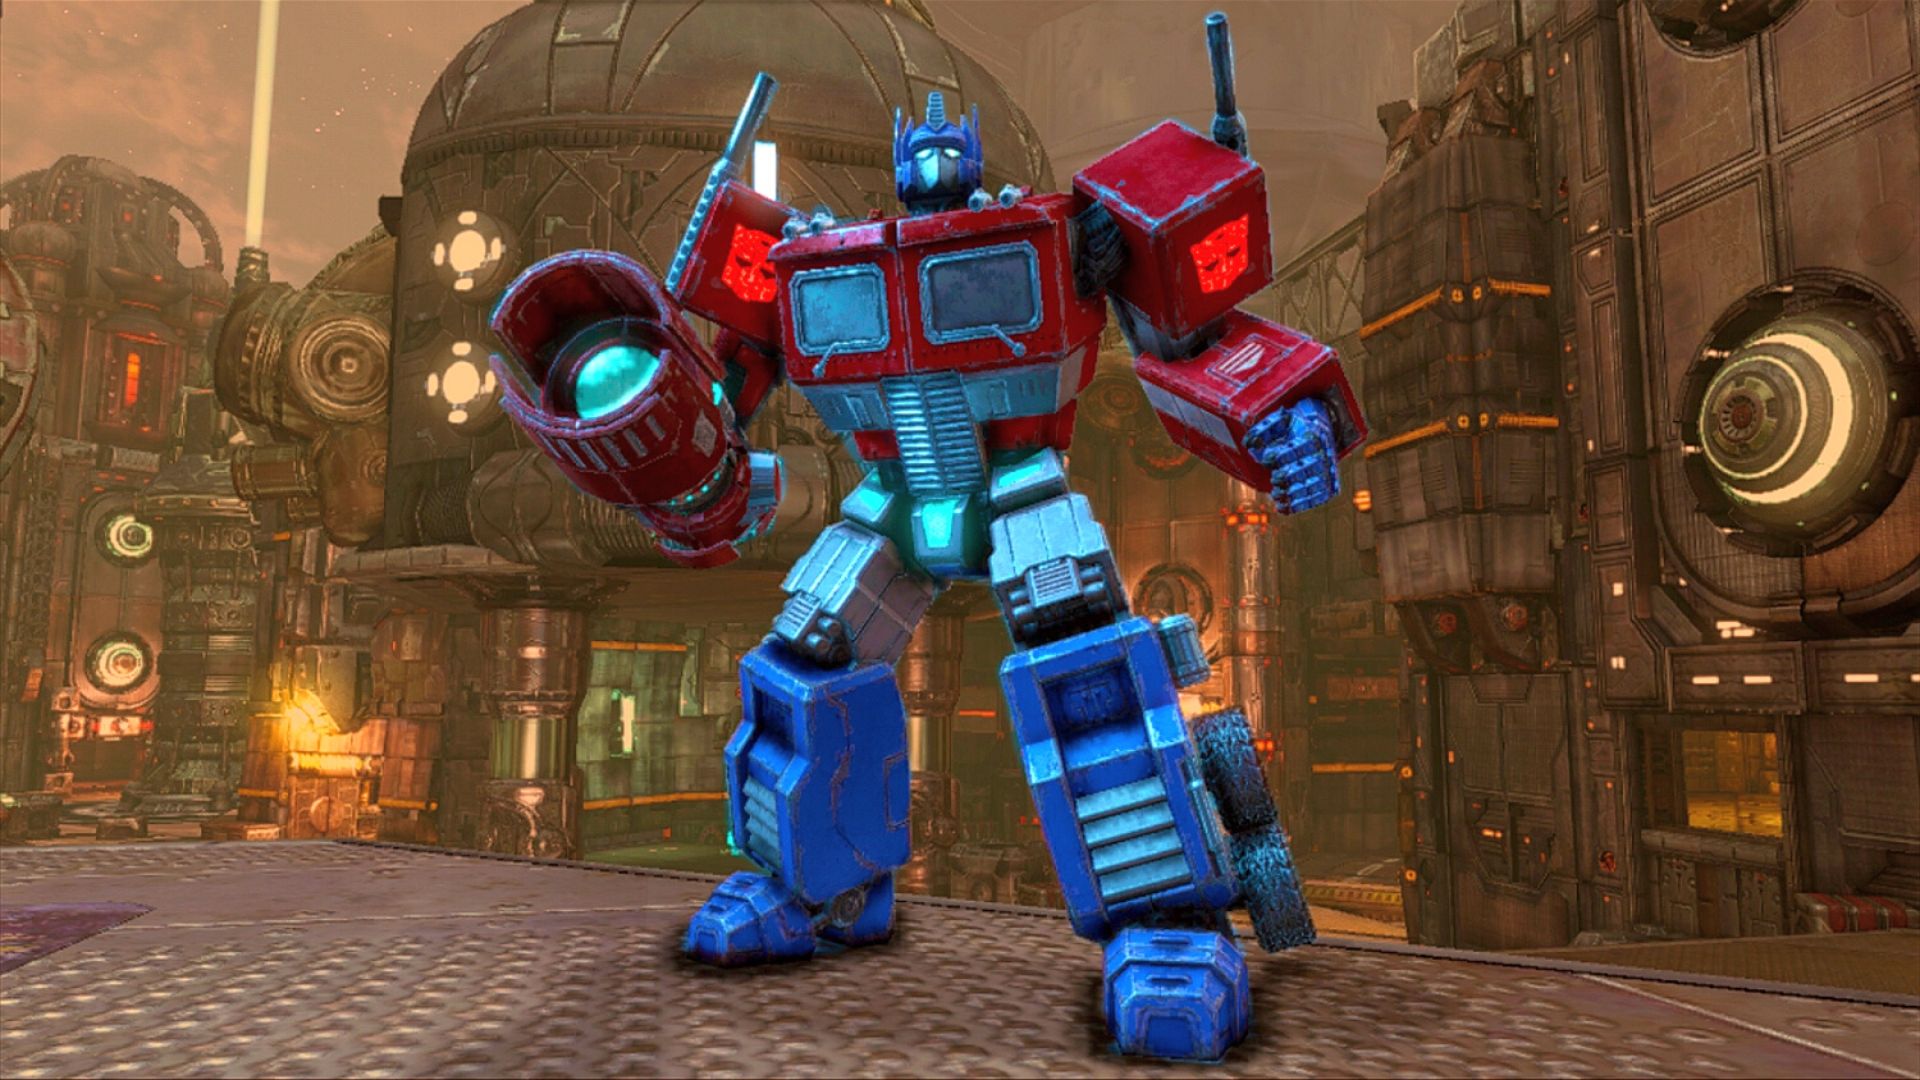 Hasbro says the best Transformers games are “an easy Game Pass add”